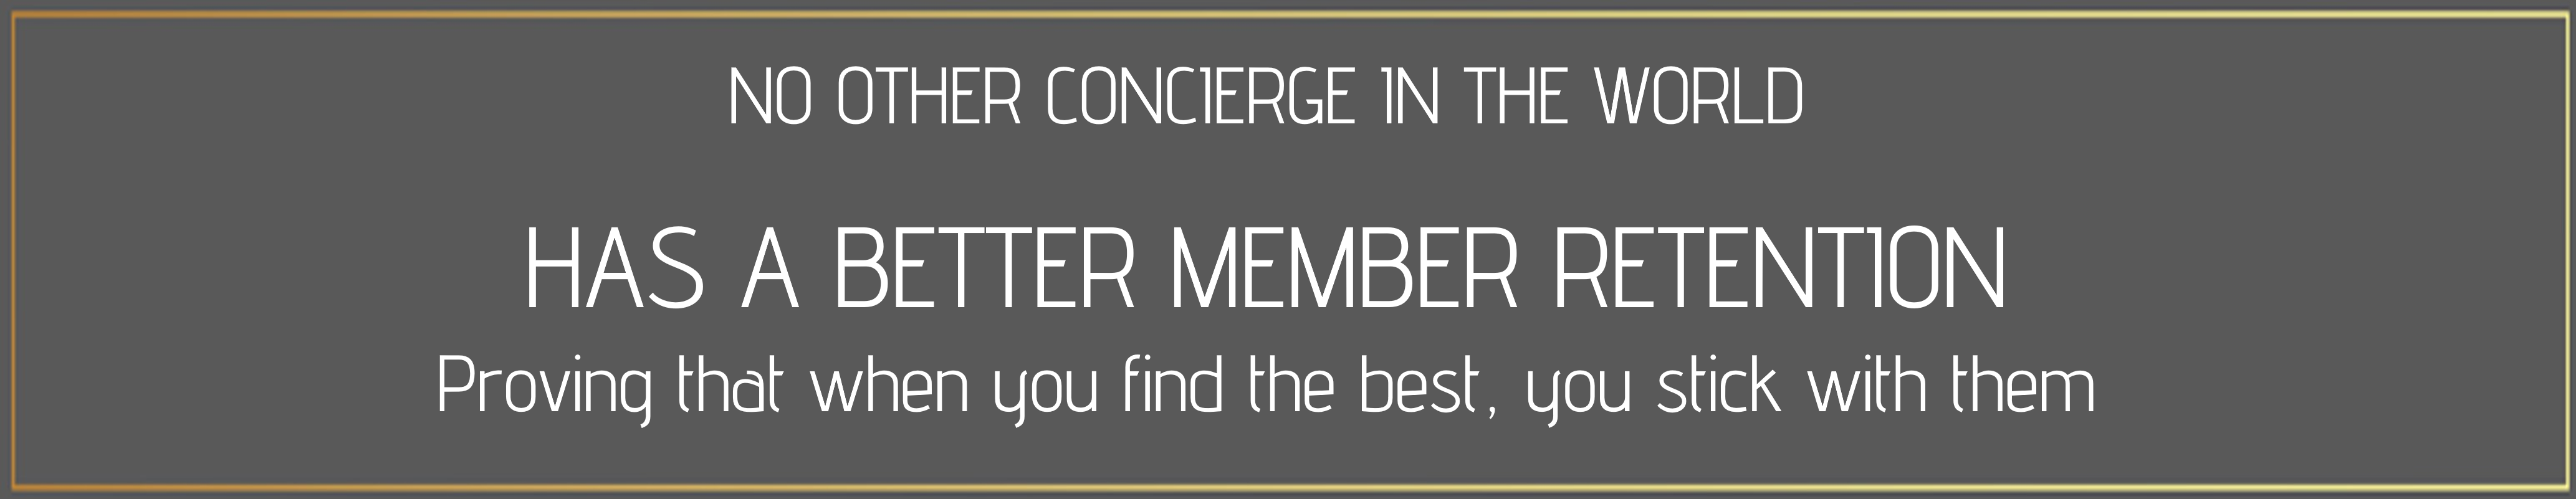 sincura conciereg has the best member satisfaction for private and corporate clients